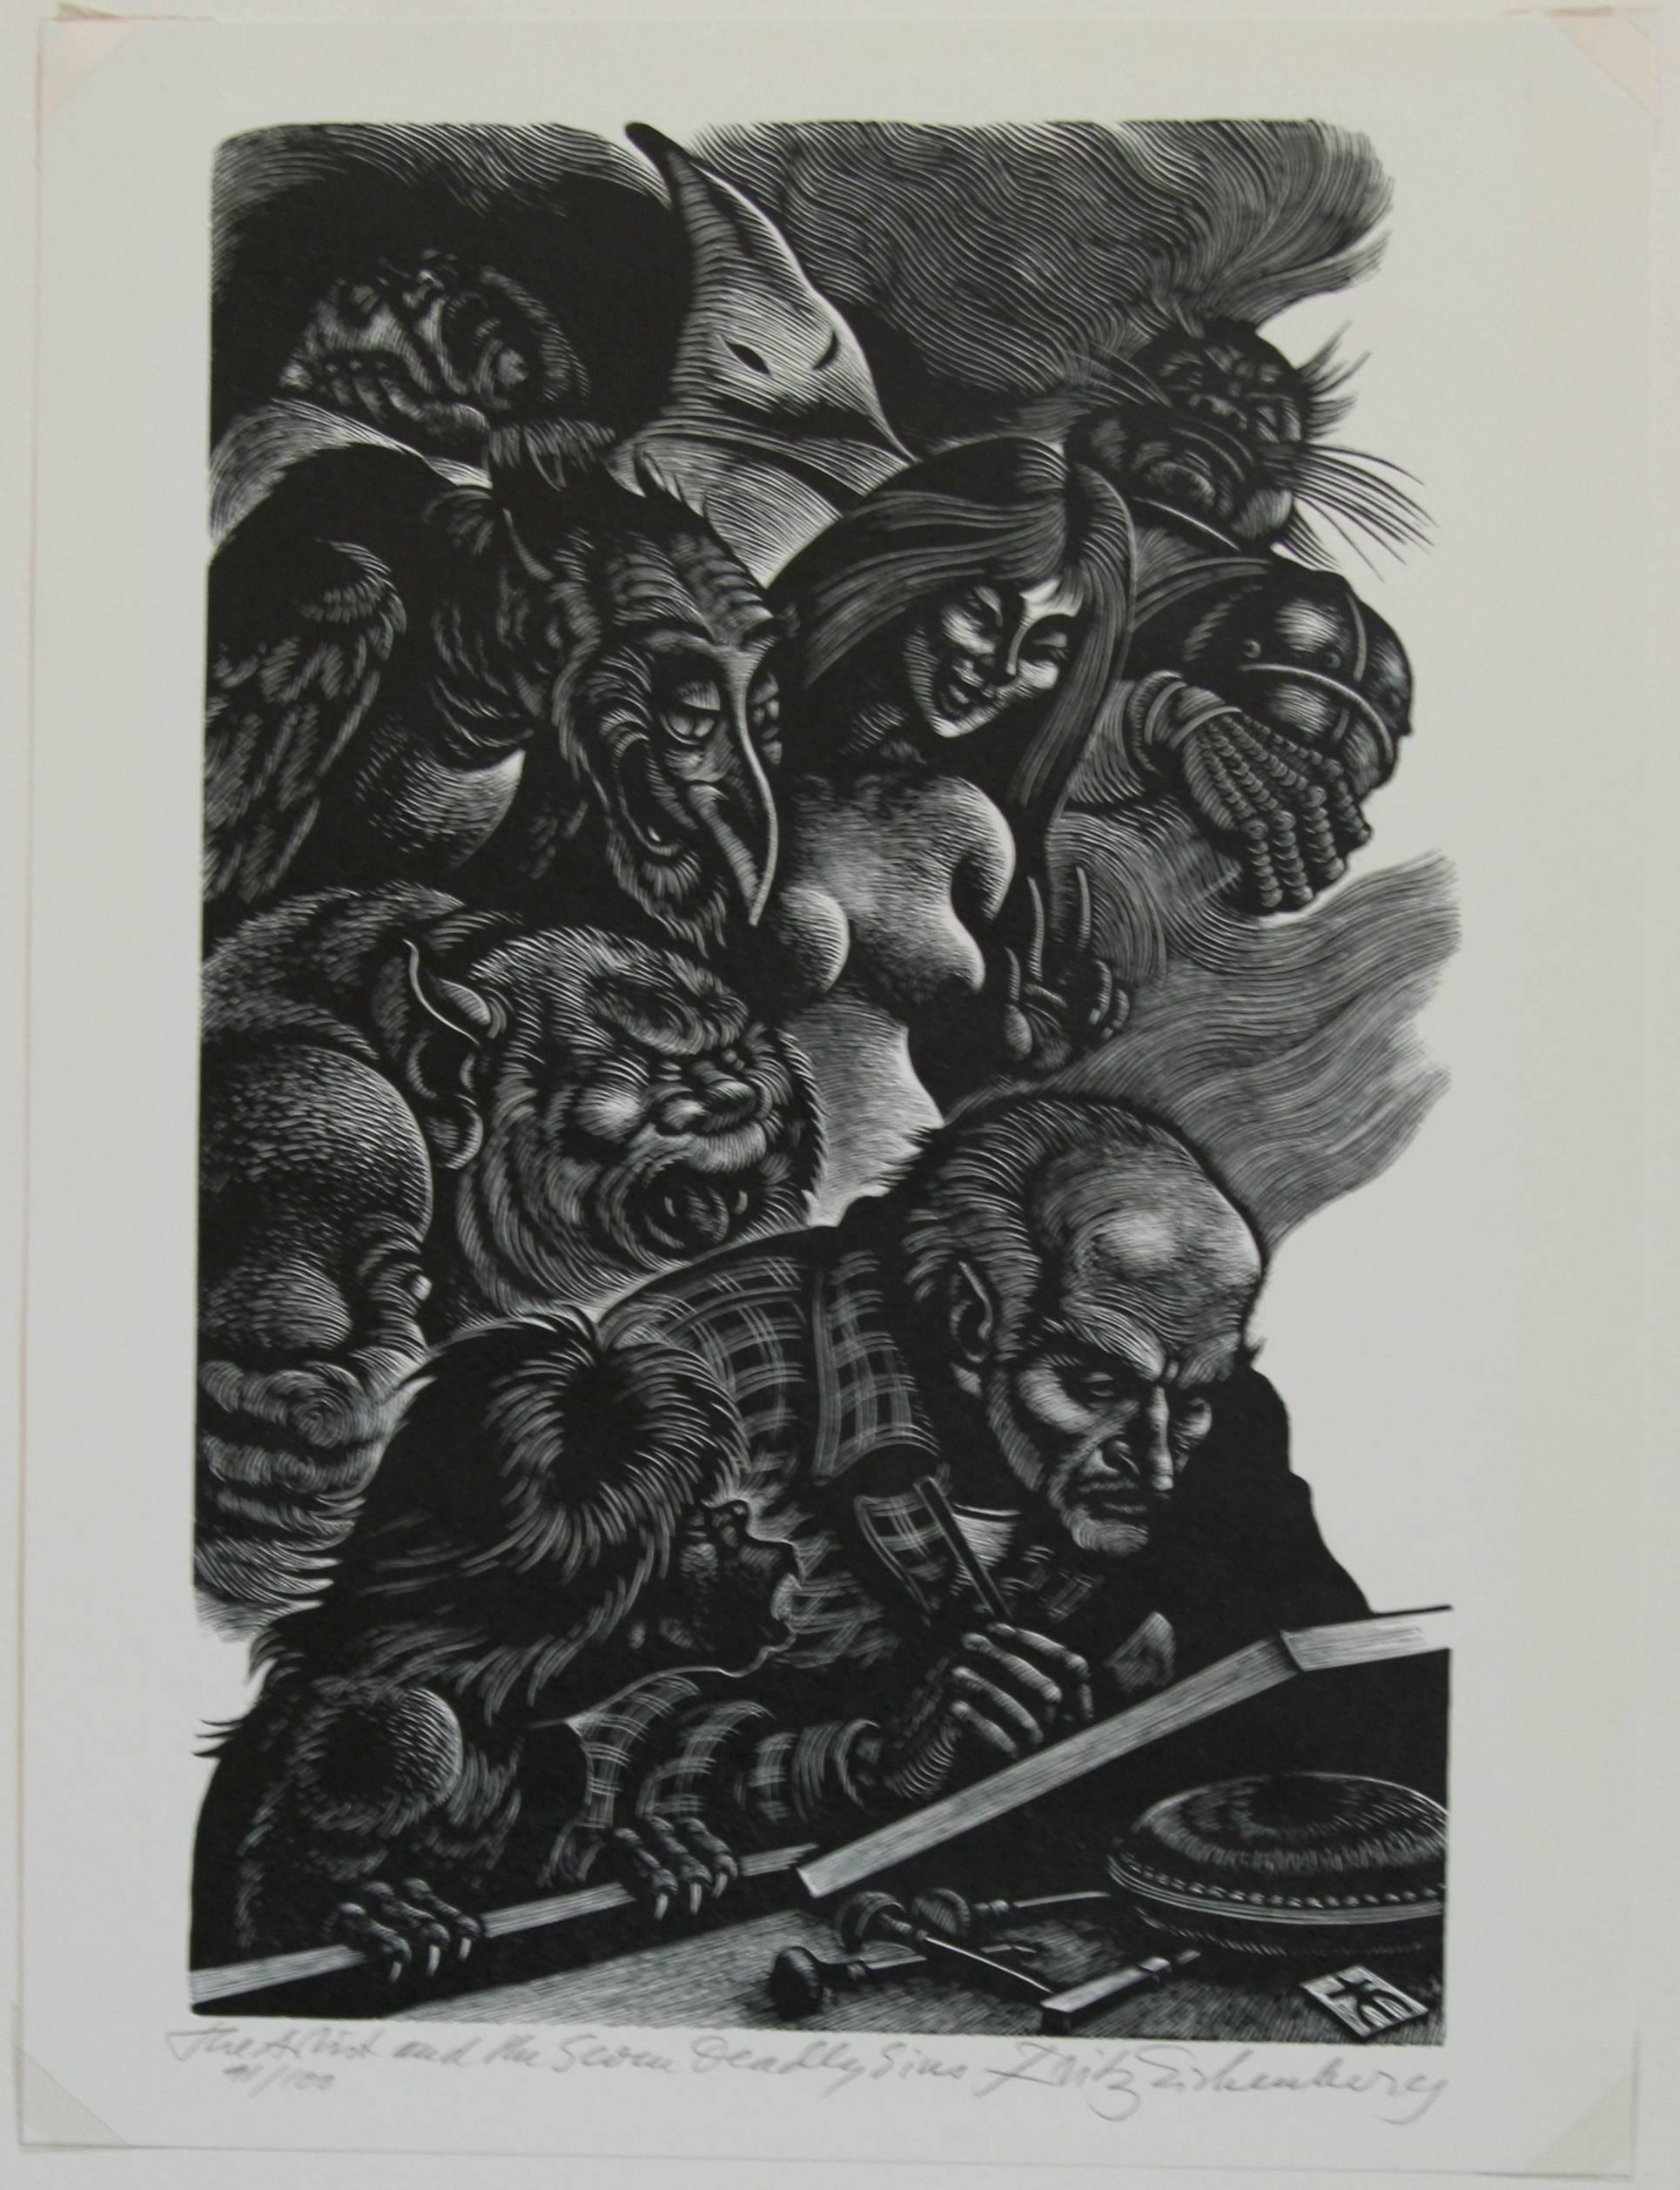 The Artist and the Seven Deadly Sins. - Print by Fritz Eichenberg.